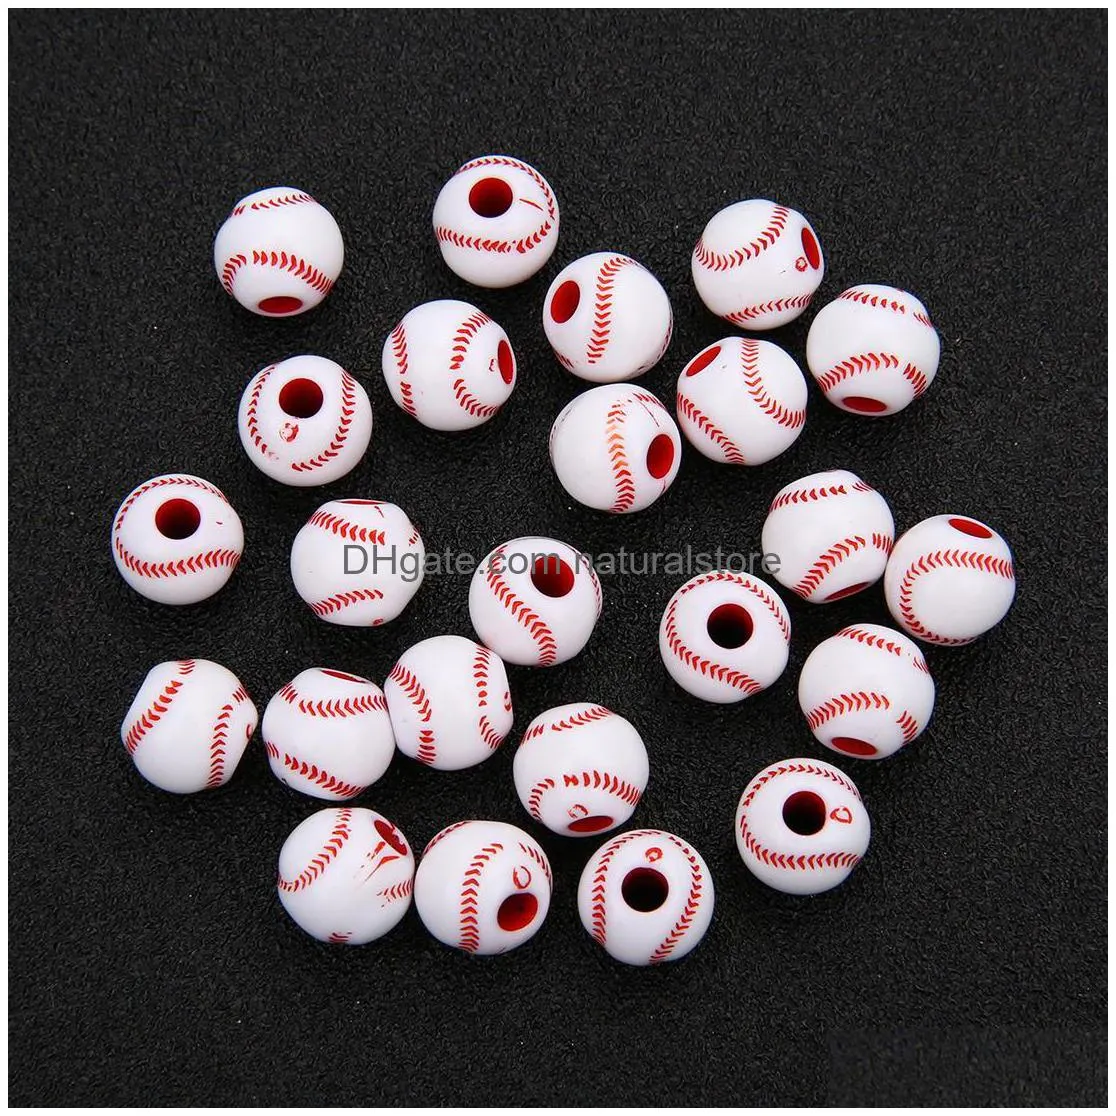 50pc/lot football baseball basketball tennis acrylic beads sport ball spacer bead fit for bracelet necklace diy jewelry making